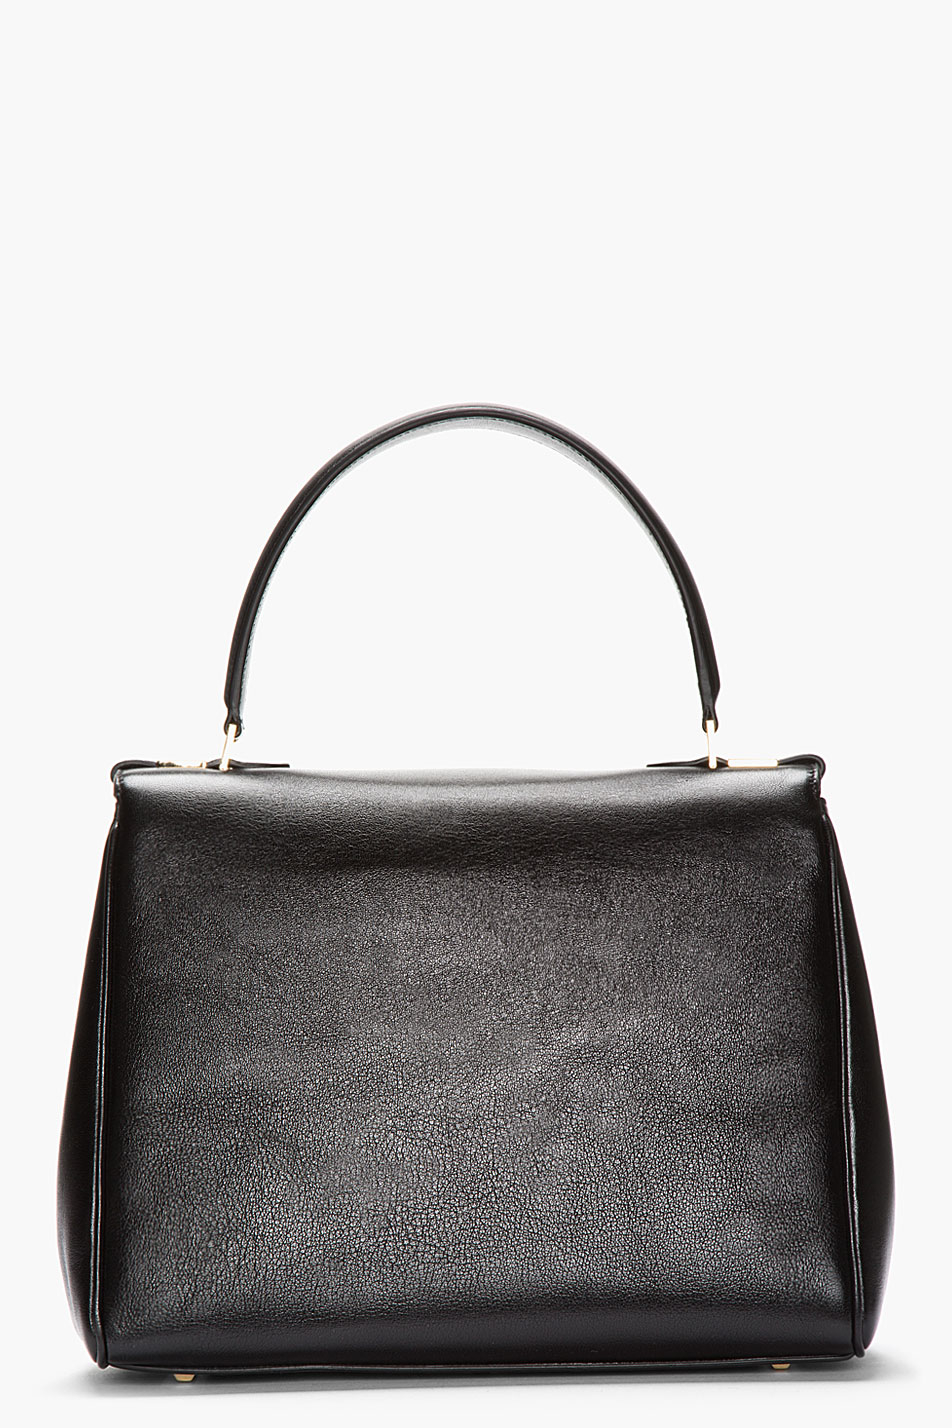 Lyst - Marc jacobs Black Leather and Suede The Grand Metropolitan Tote ...